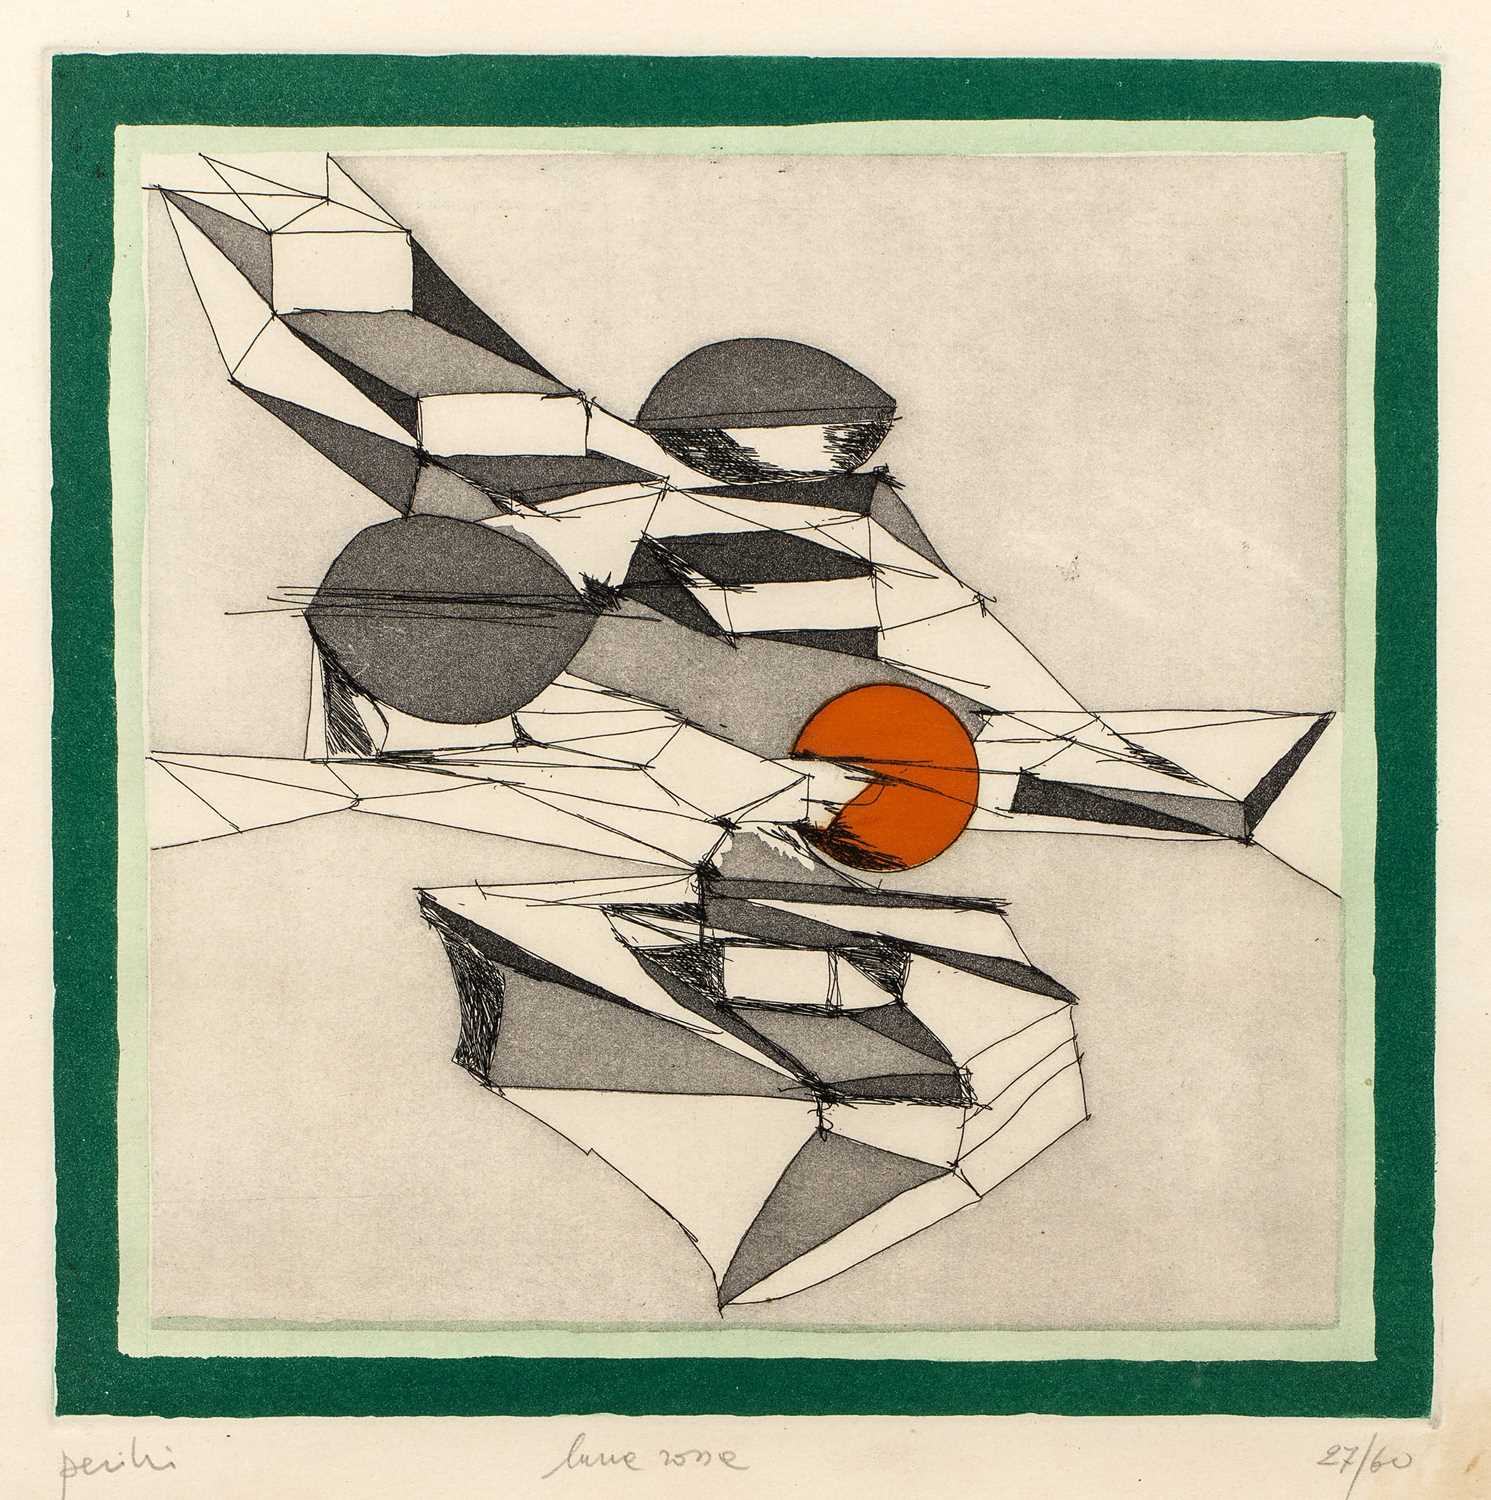 Achille Perilli (1927-2021) Lune Zone 27/60, signed, titled, and numbered in pencil (in the